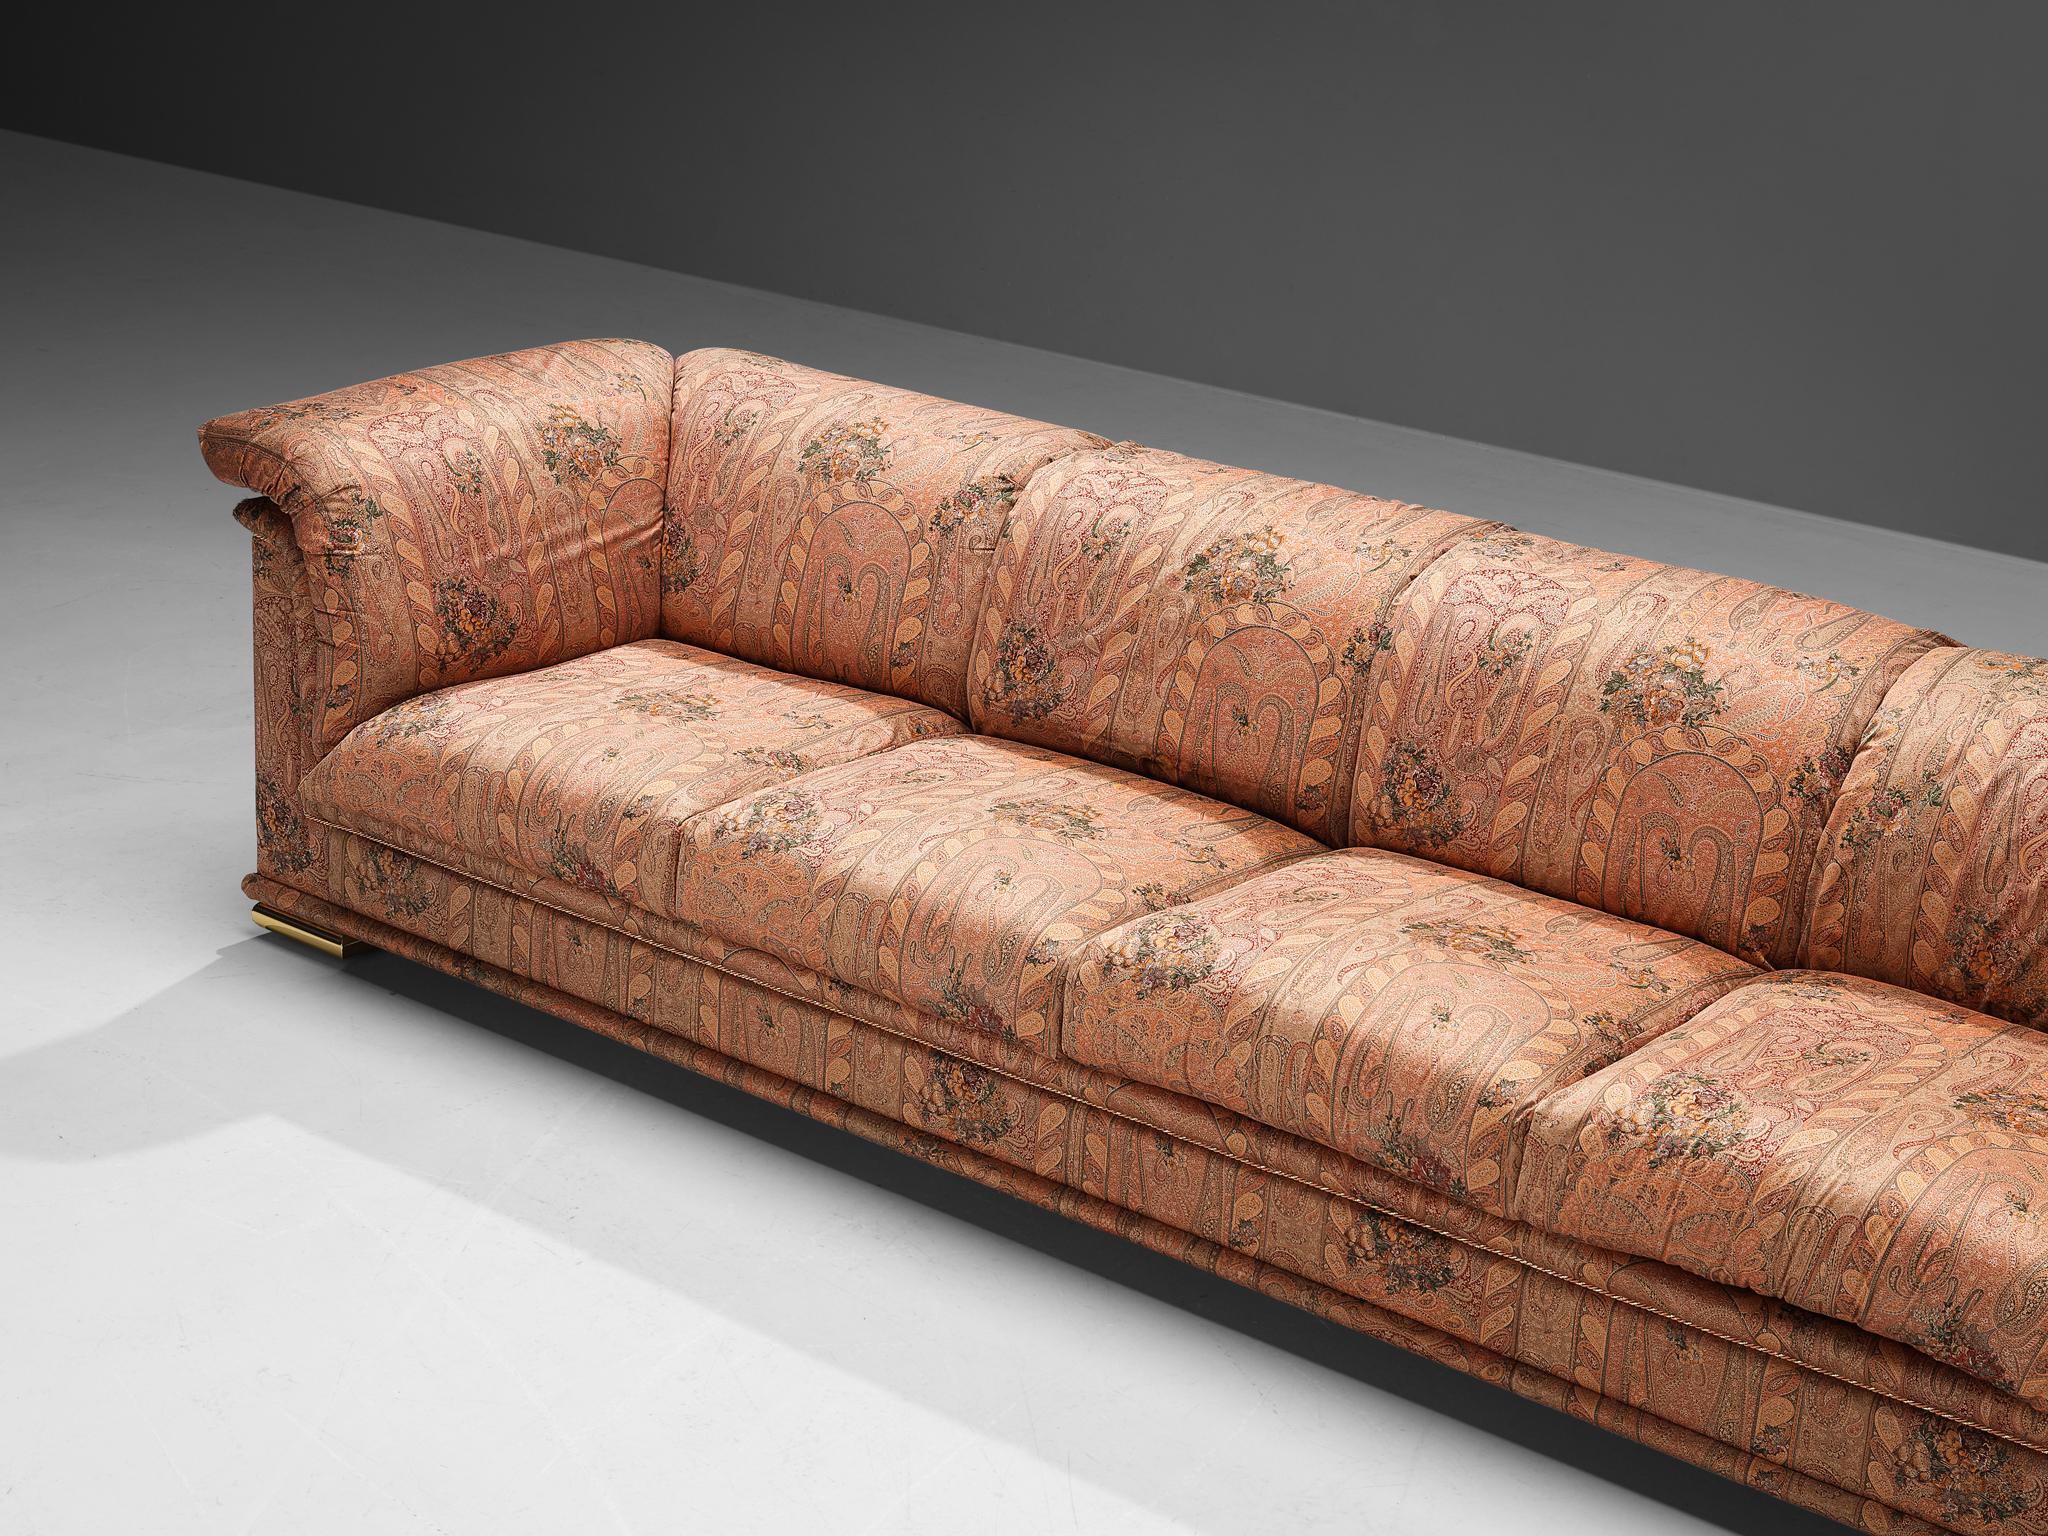 Metal Large Italian Sofa in Vibrant Red Paisley Upholstery